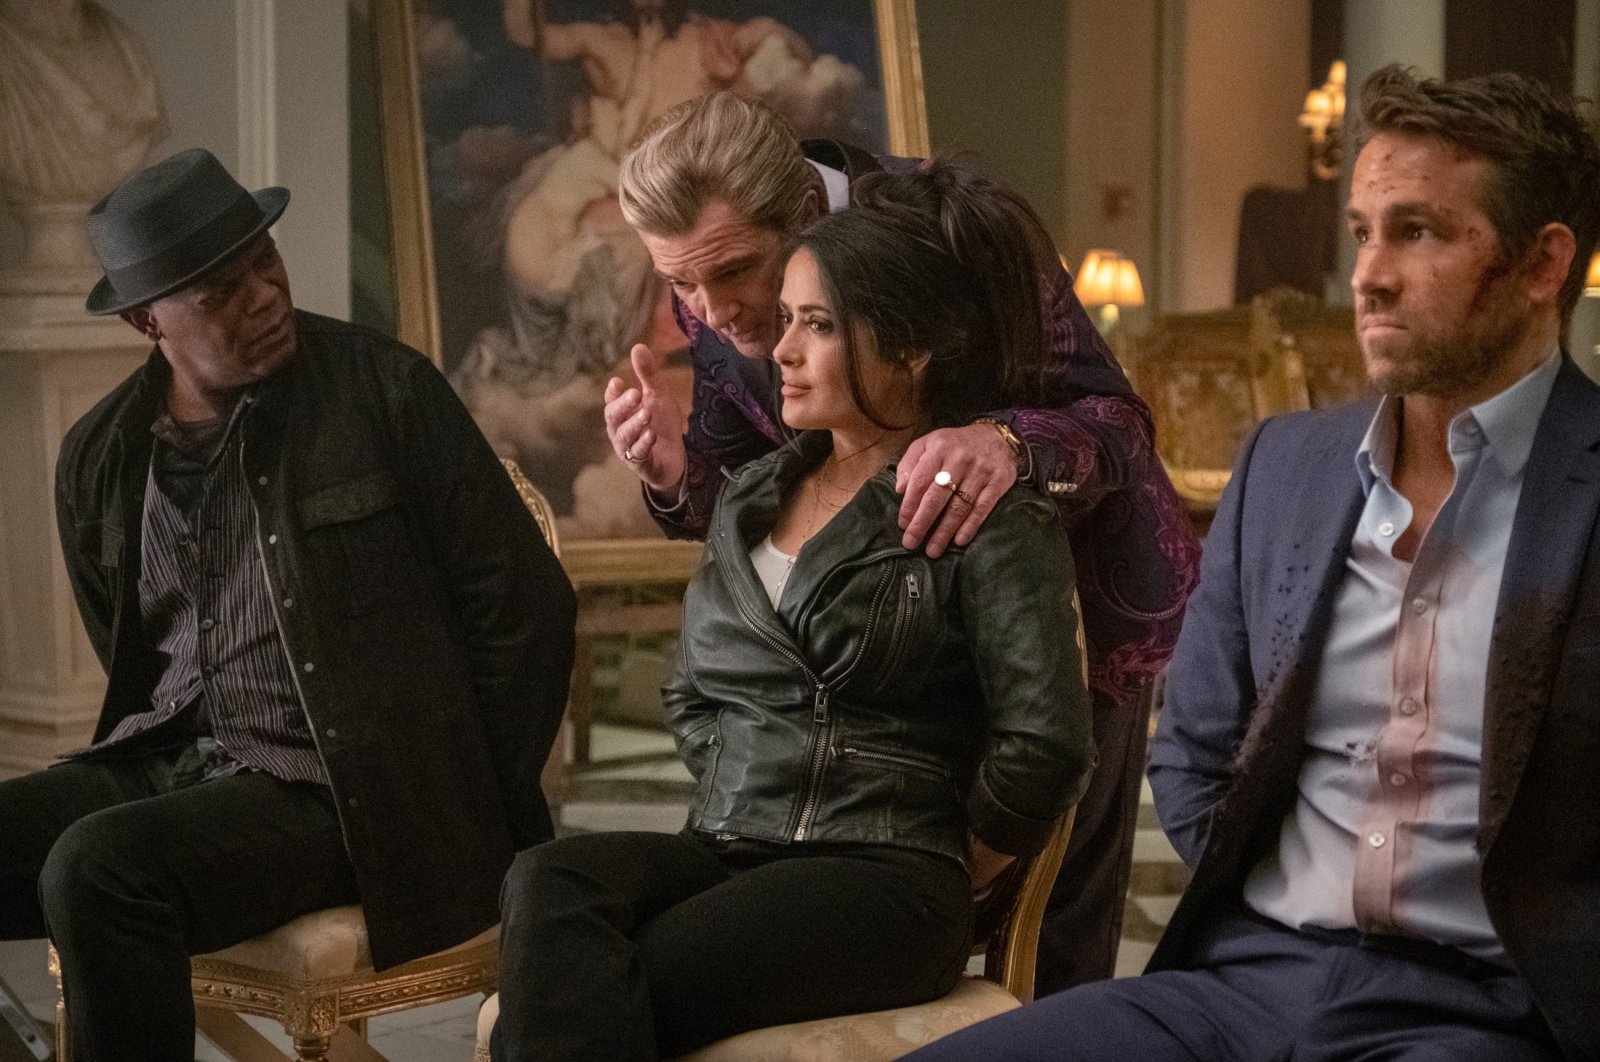 Antonio Banderas (C-L) has a conversation with Samuel L. Jackson (L), Salma Hayek (C-R) and Ryan Reynolds (R) in a scene from the movie, "The Hitman's Wife's Bodyguard." (Lionsgate via AP)